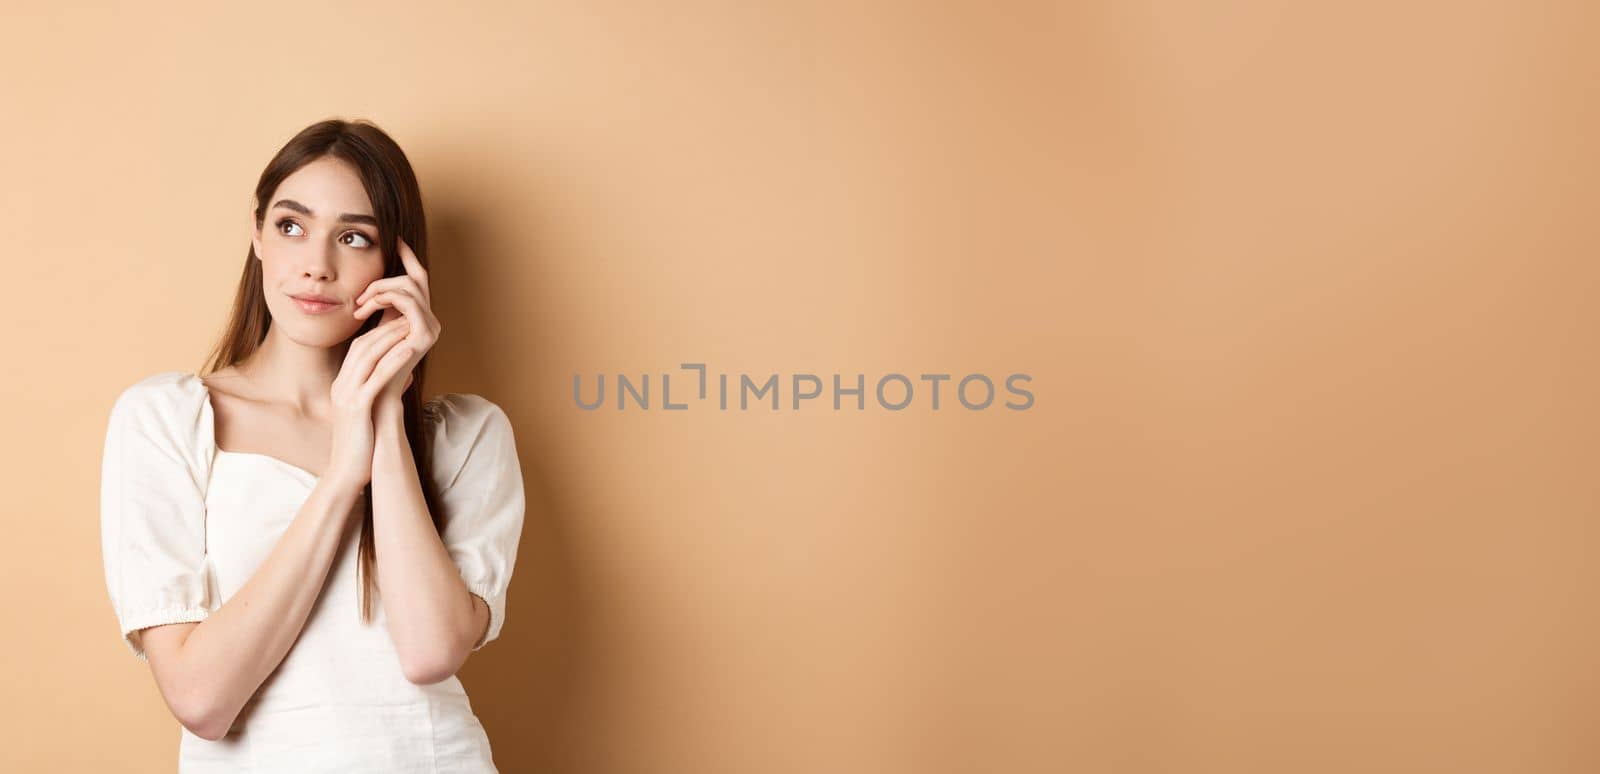 Dreamy and romantic girl looking aside with thoughtful gaze, touching clean gentle facial skin, standing against beige background.